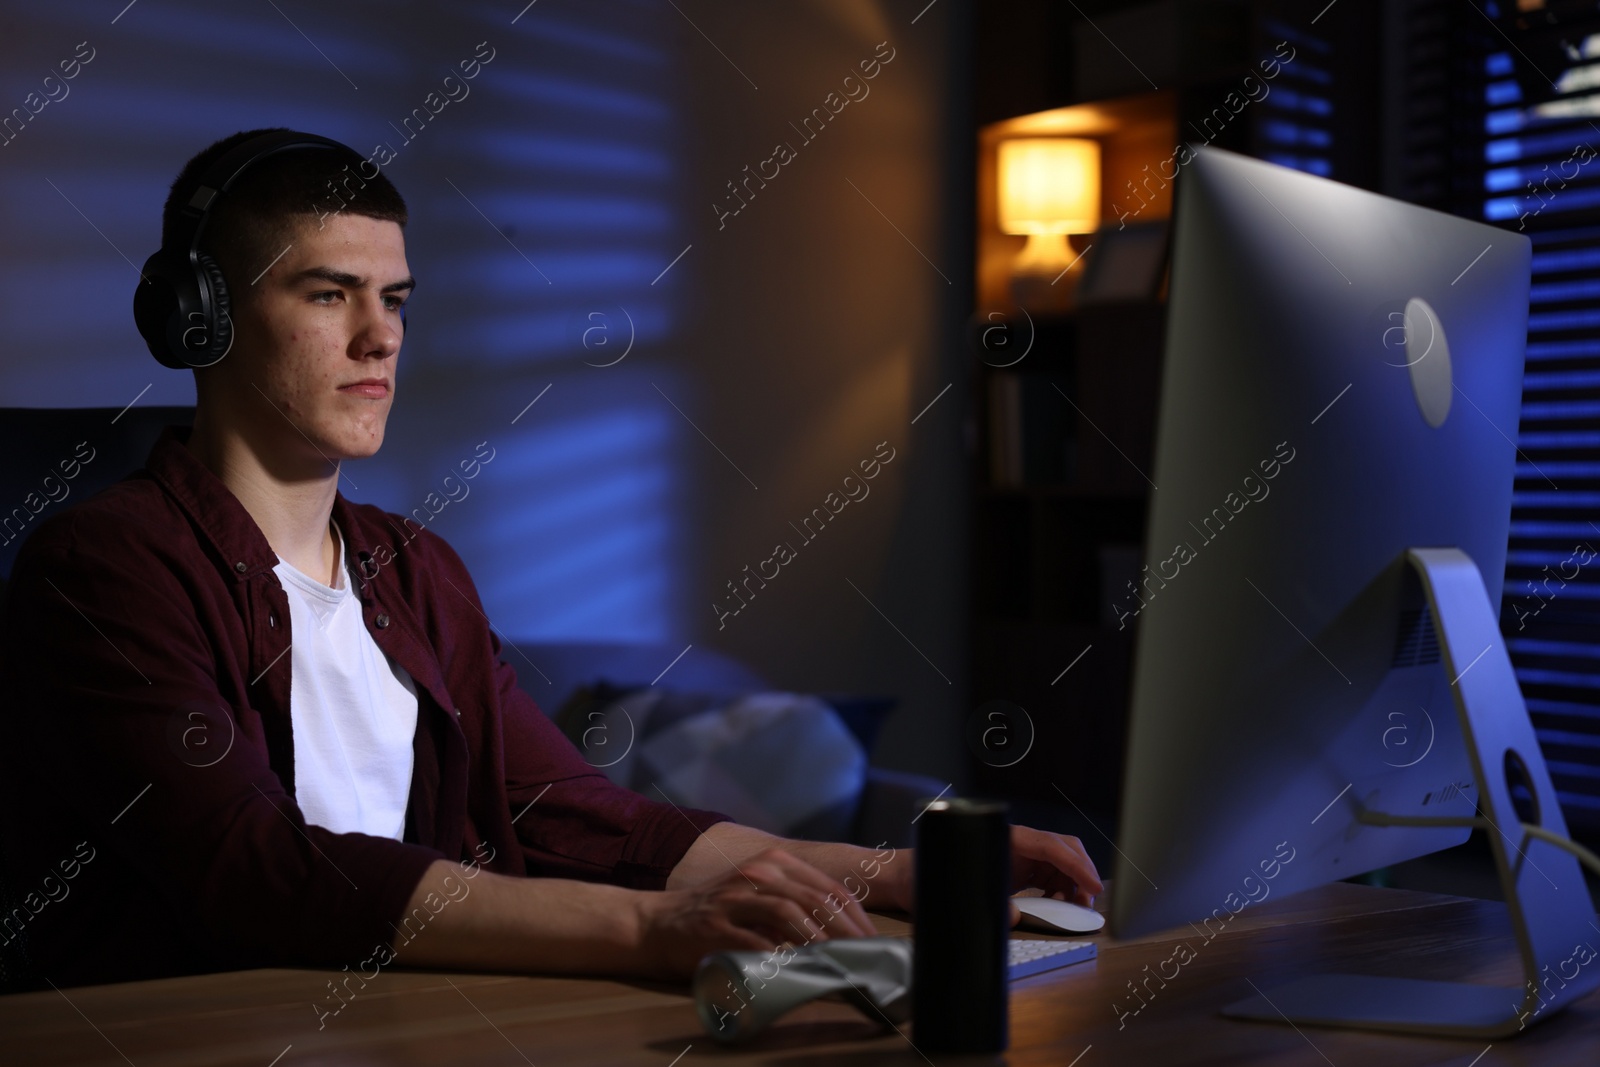 Photo of Man playing video games on computer at table indoors